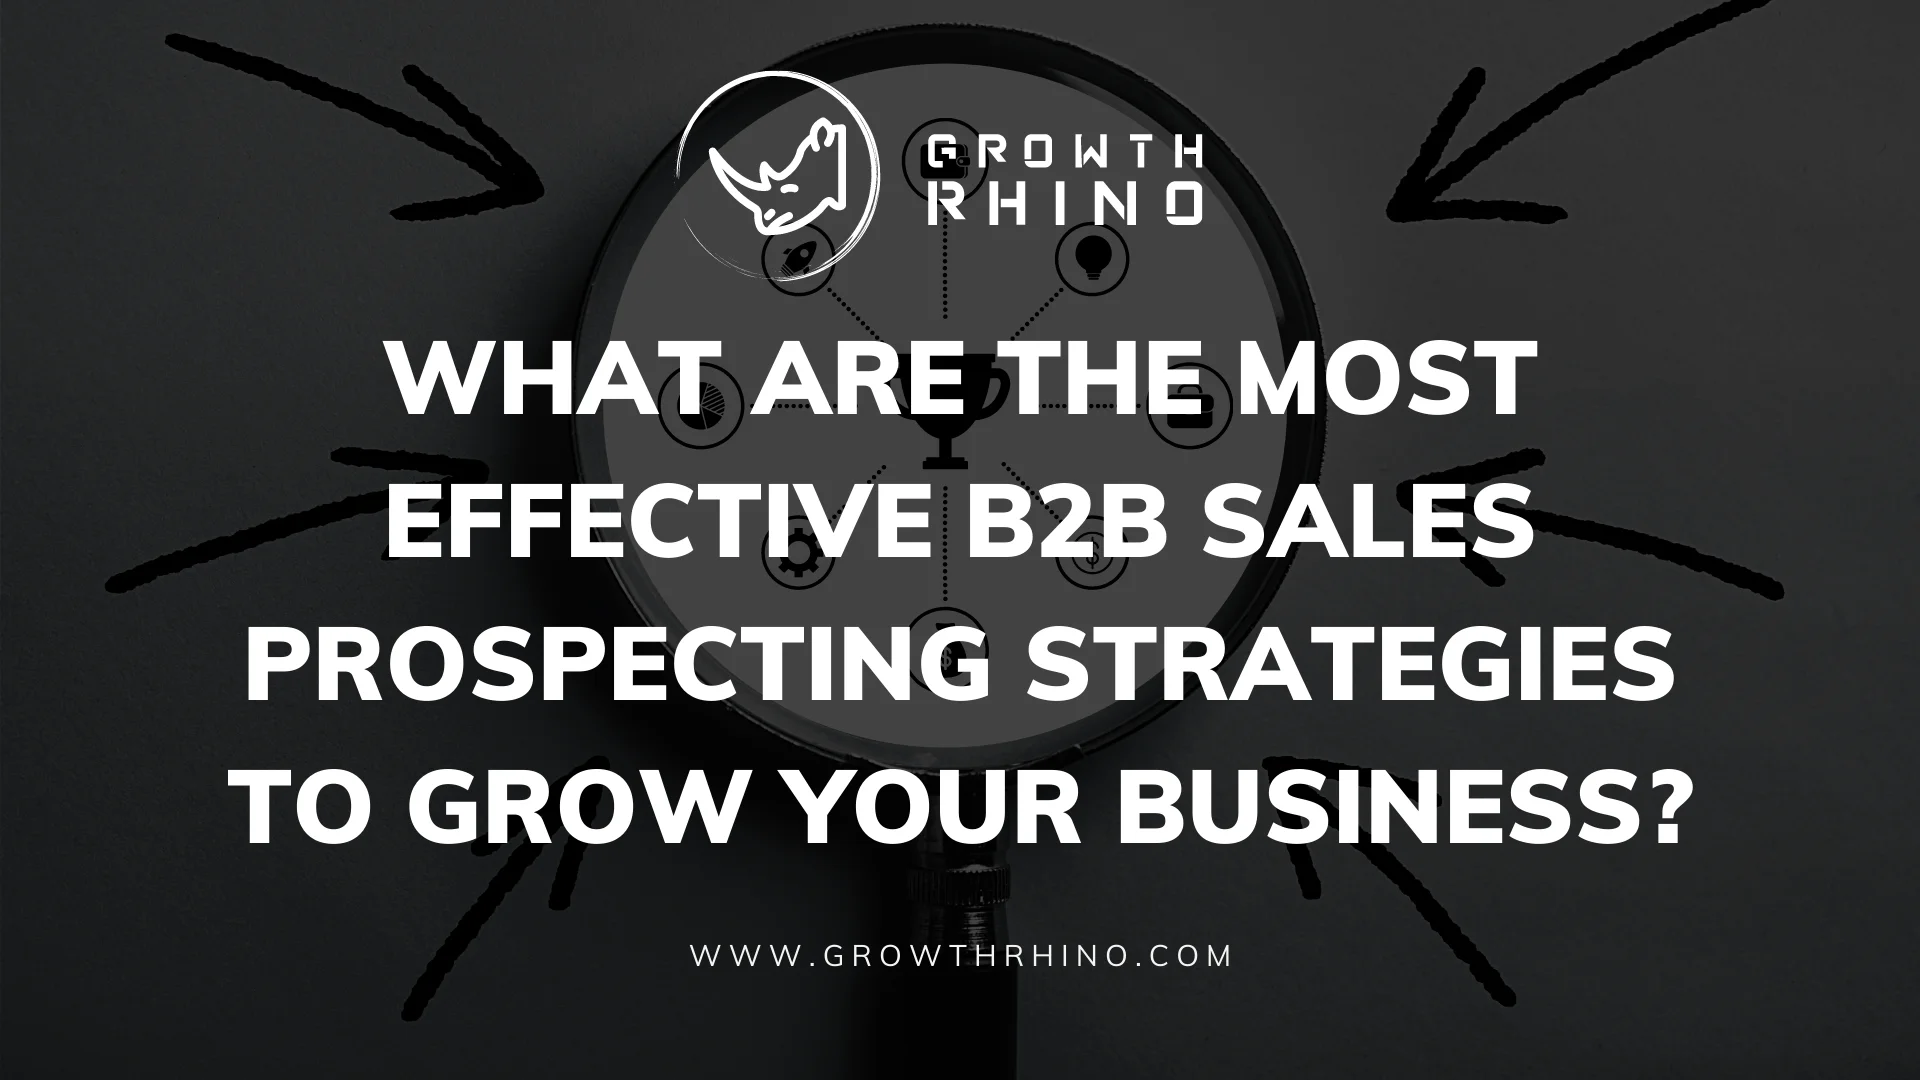 What are the Most Effective B2B Sales Prospecting Strategies?